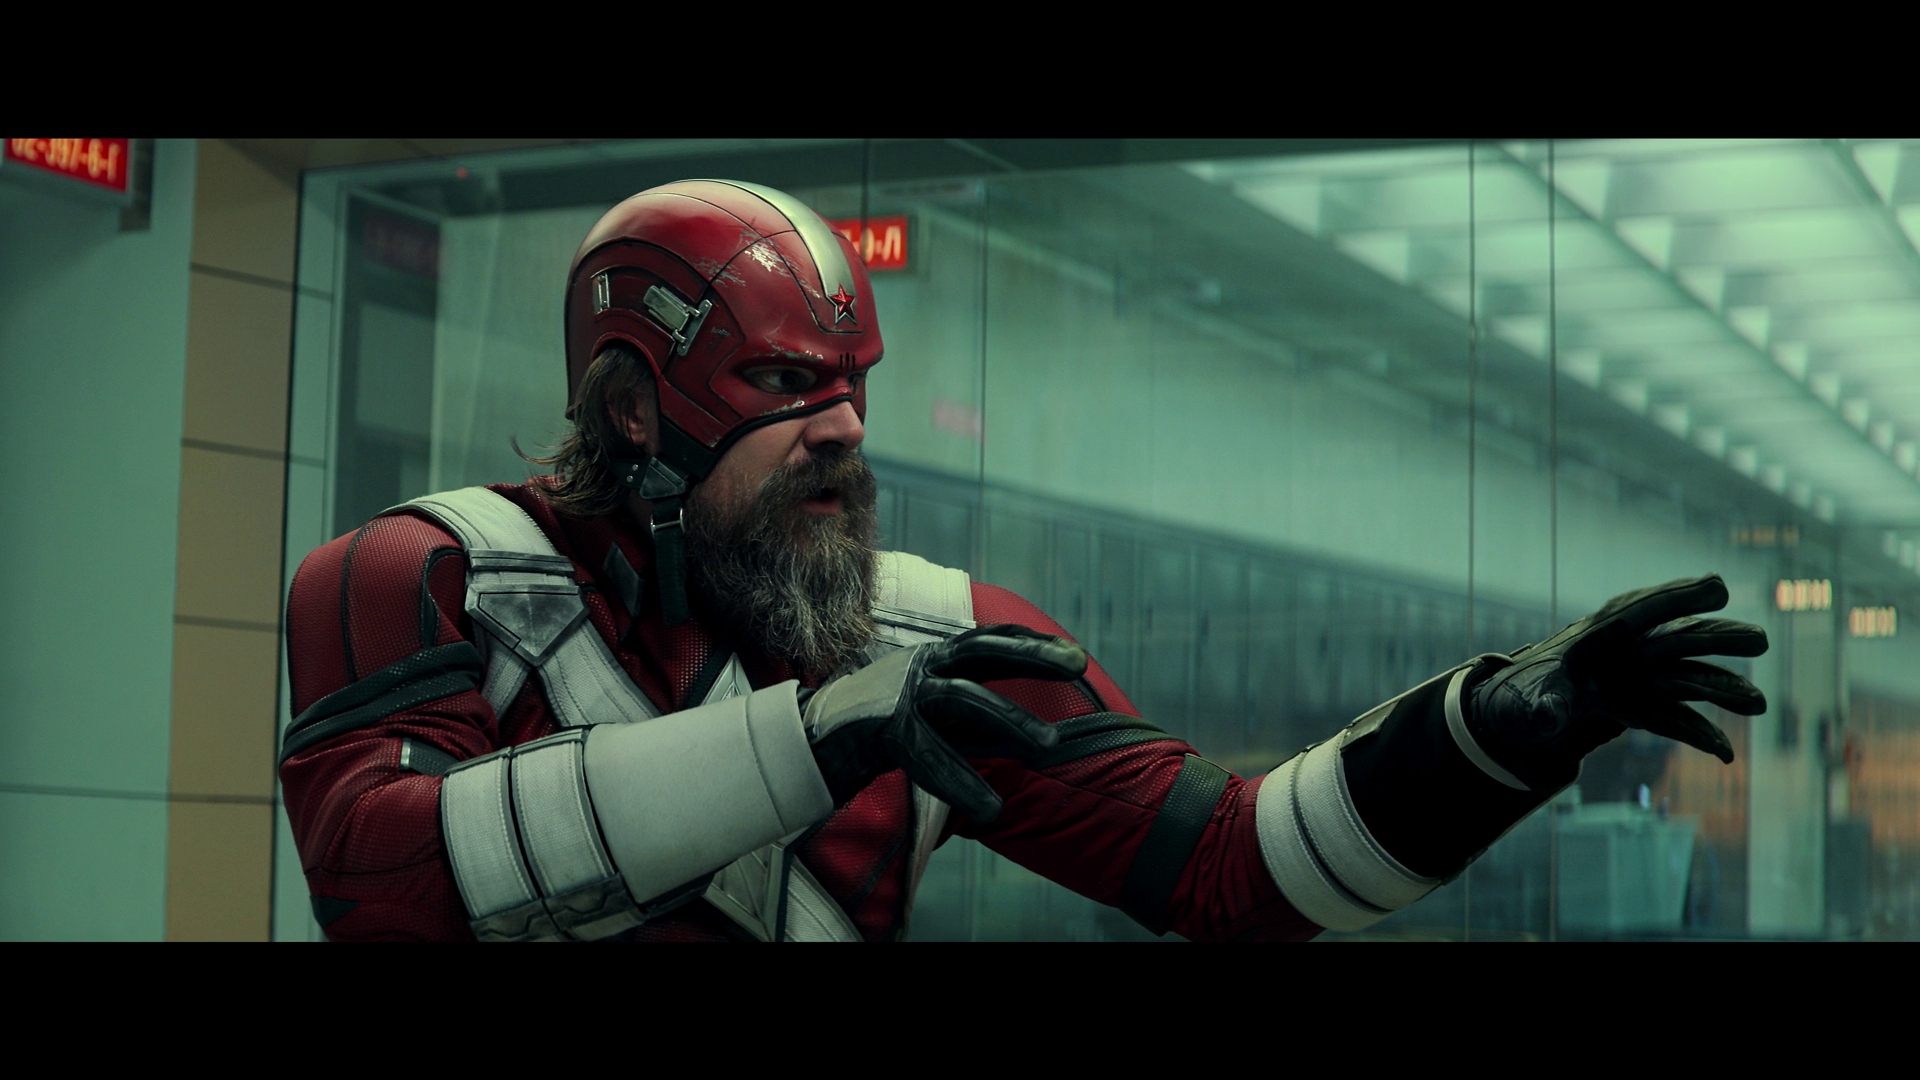 Red Guardian (David Harbour) suits up once again in Black Widow (2021), Marvel Entertainment